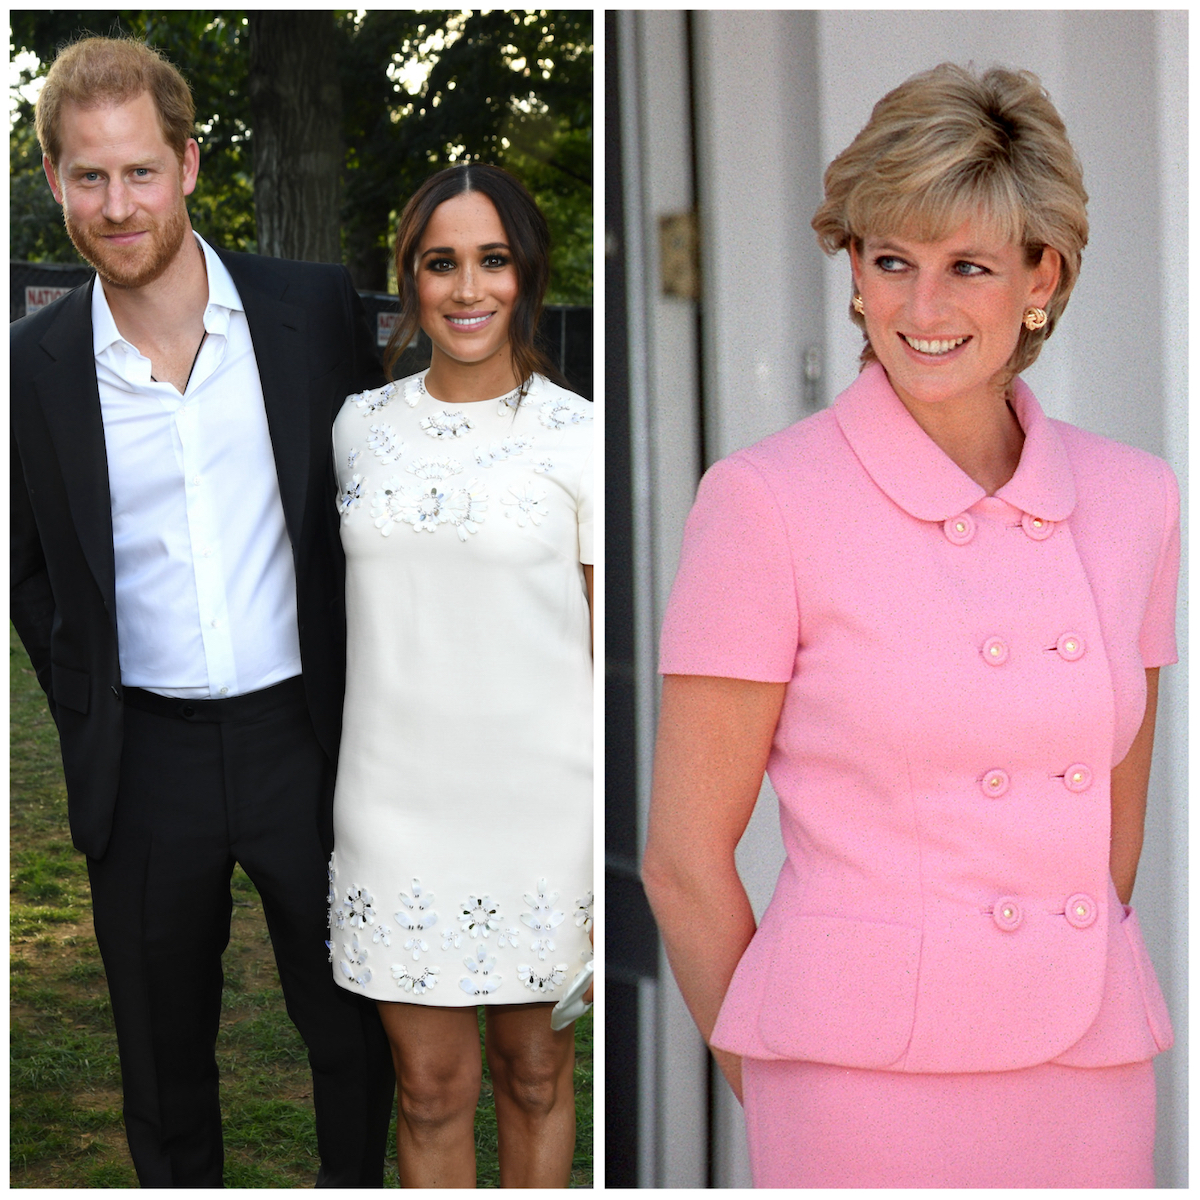 Prince Harry and Meghan Markle, who didn't understand 'power' of living at royal residences according to Tina Brown, stand next to each other; Princess Diana smiles wearing a pink outfit